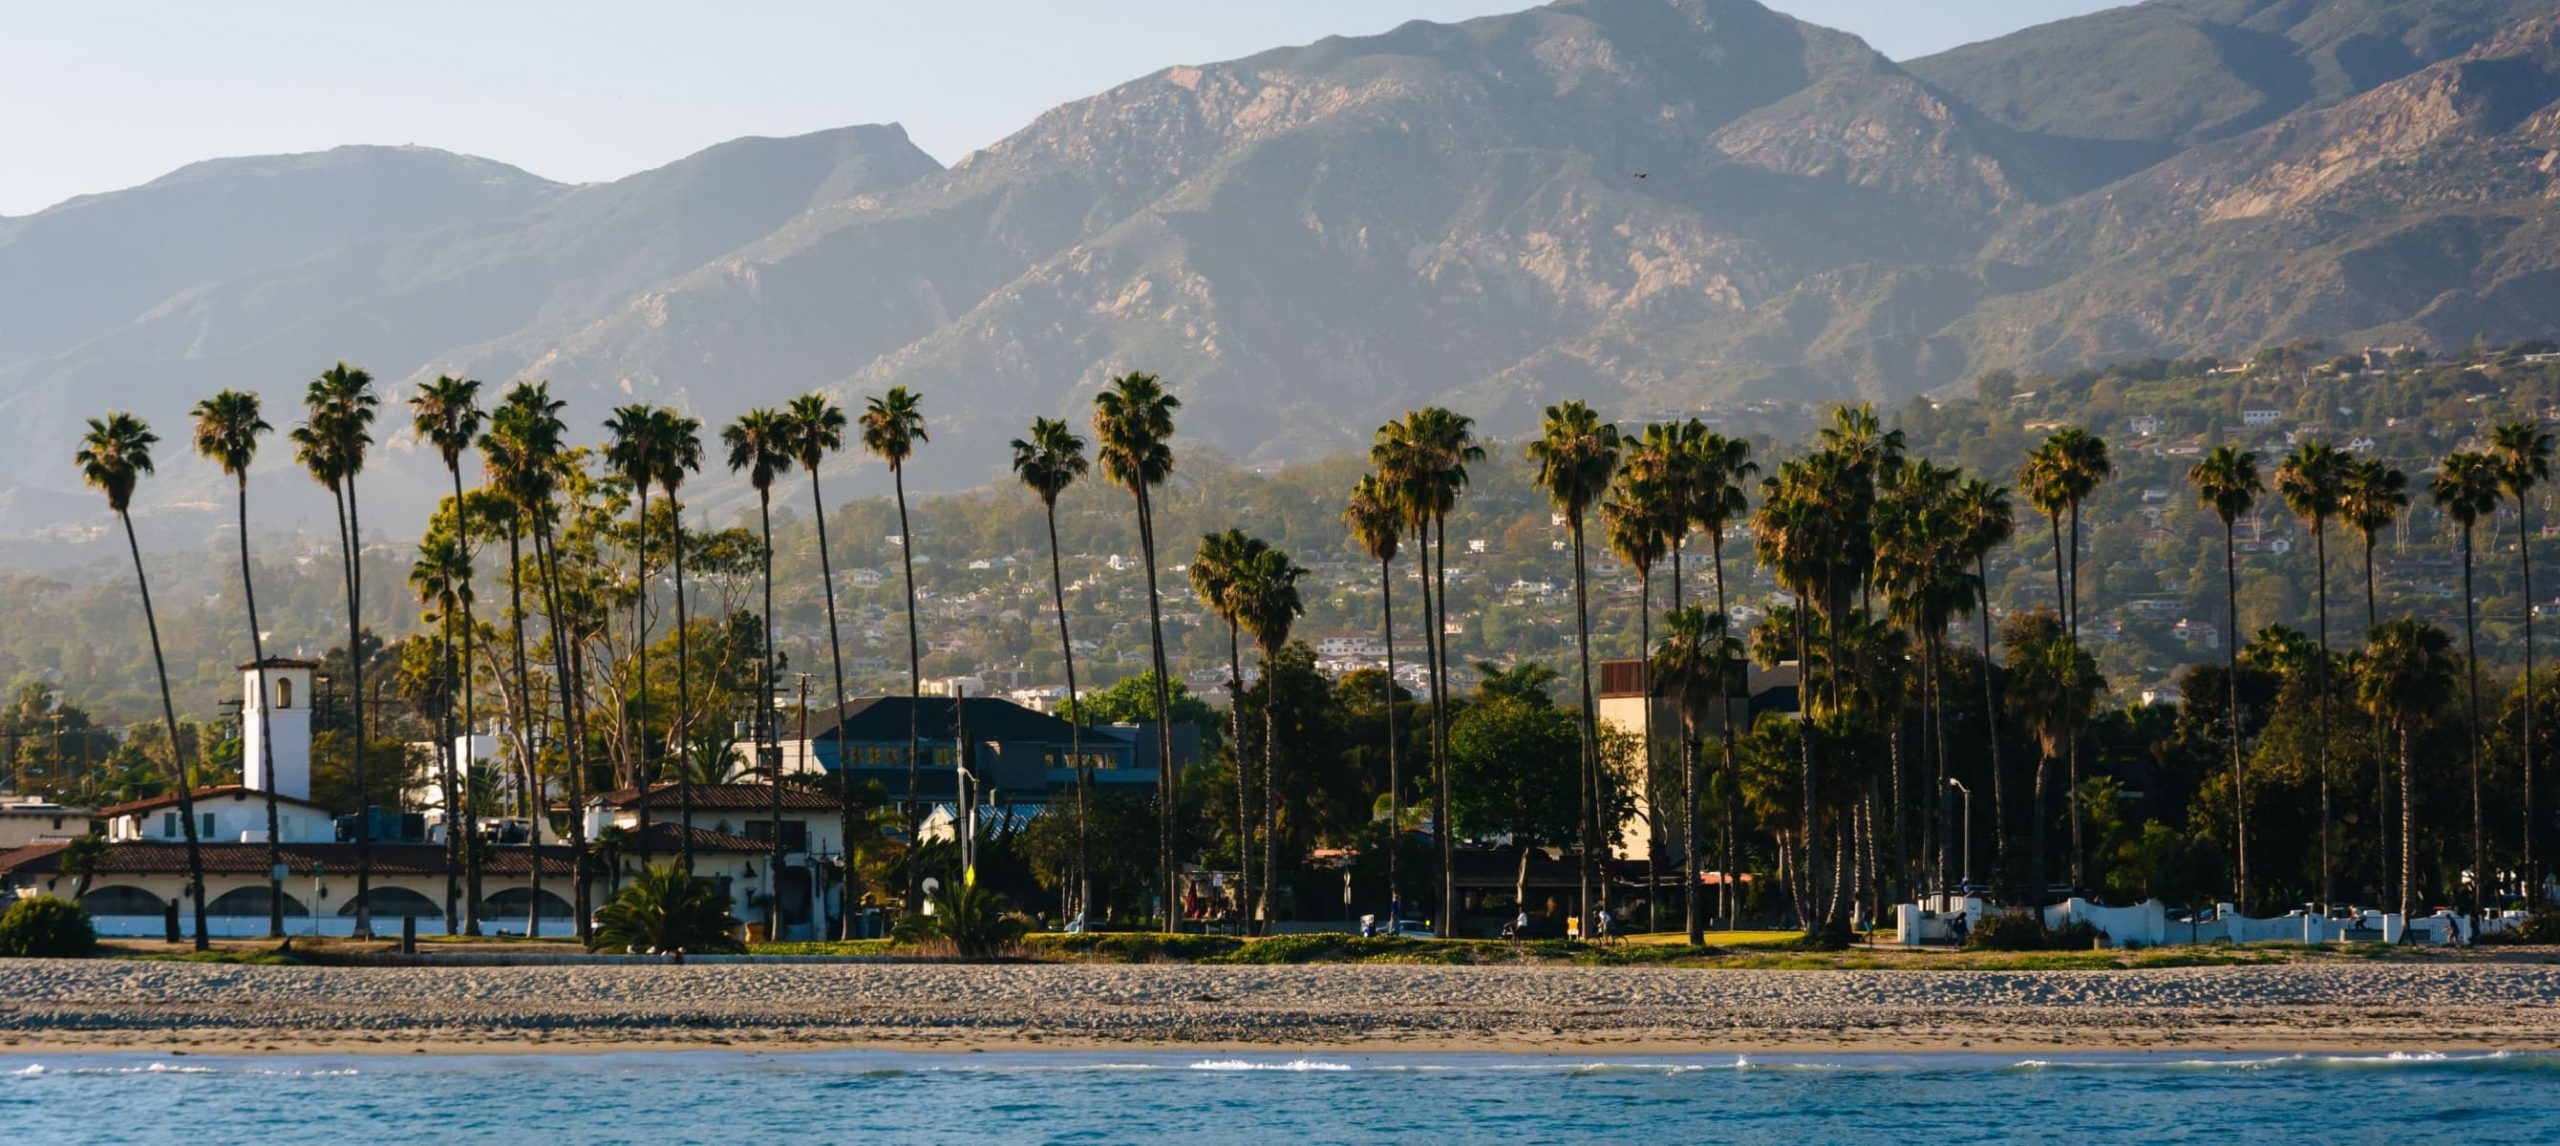 Santa Barbara framed by the mountains and palm trees.